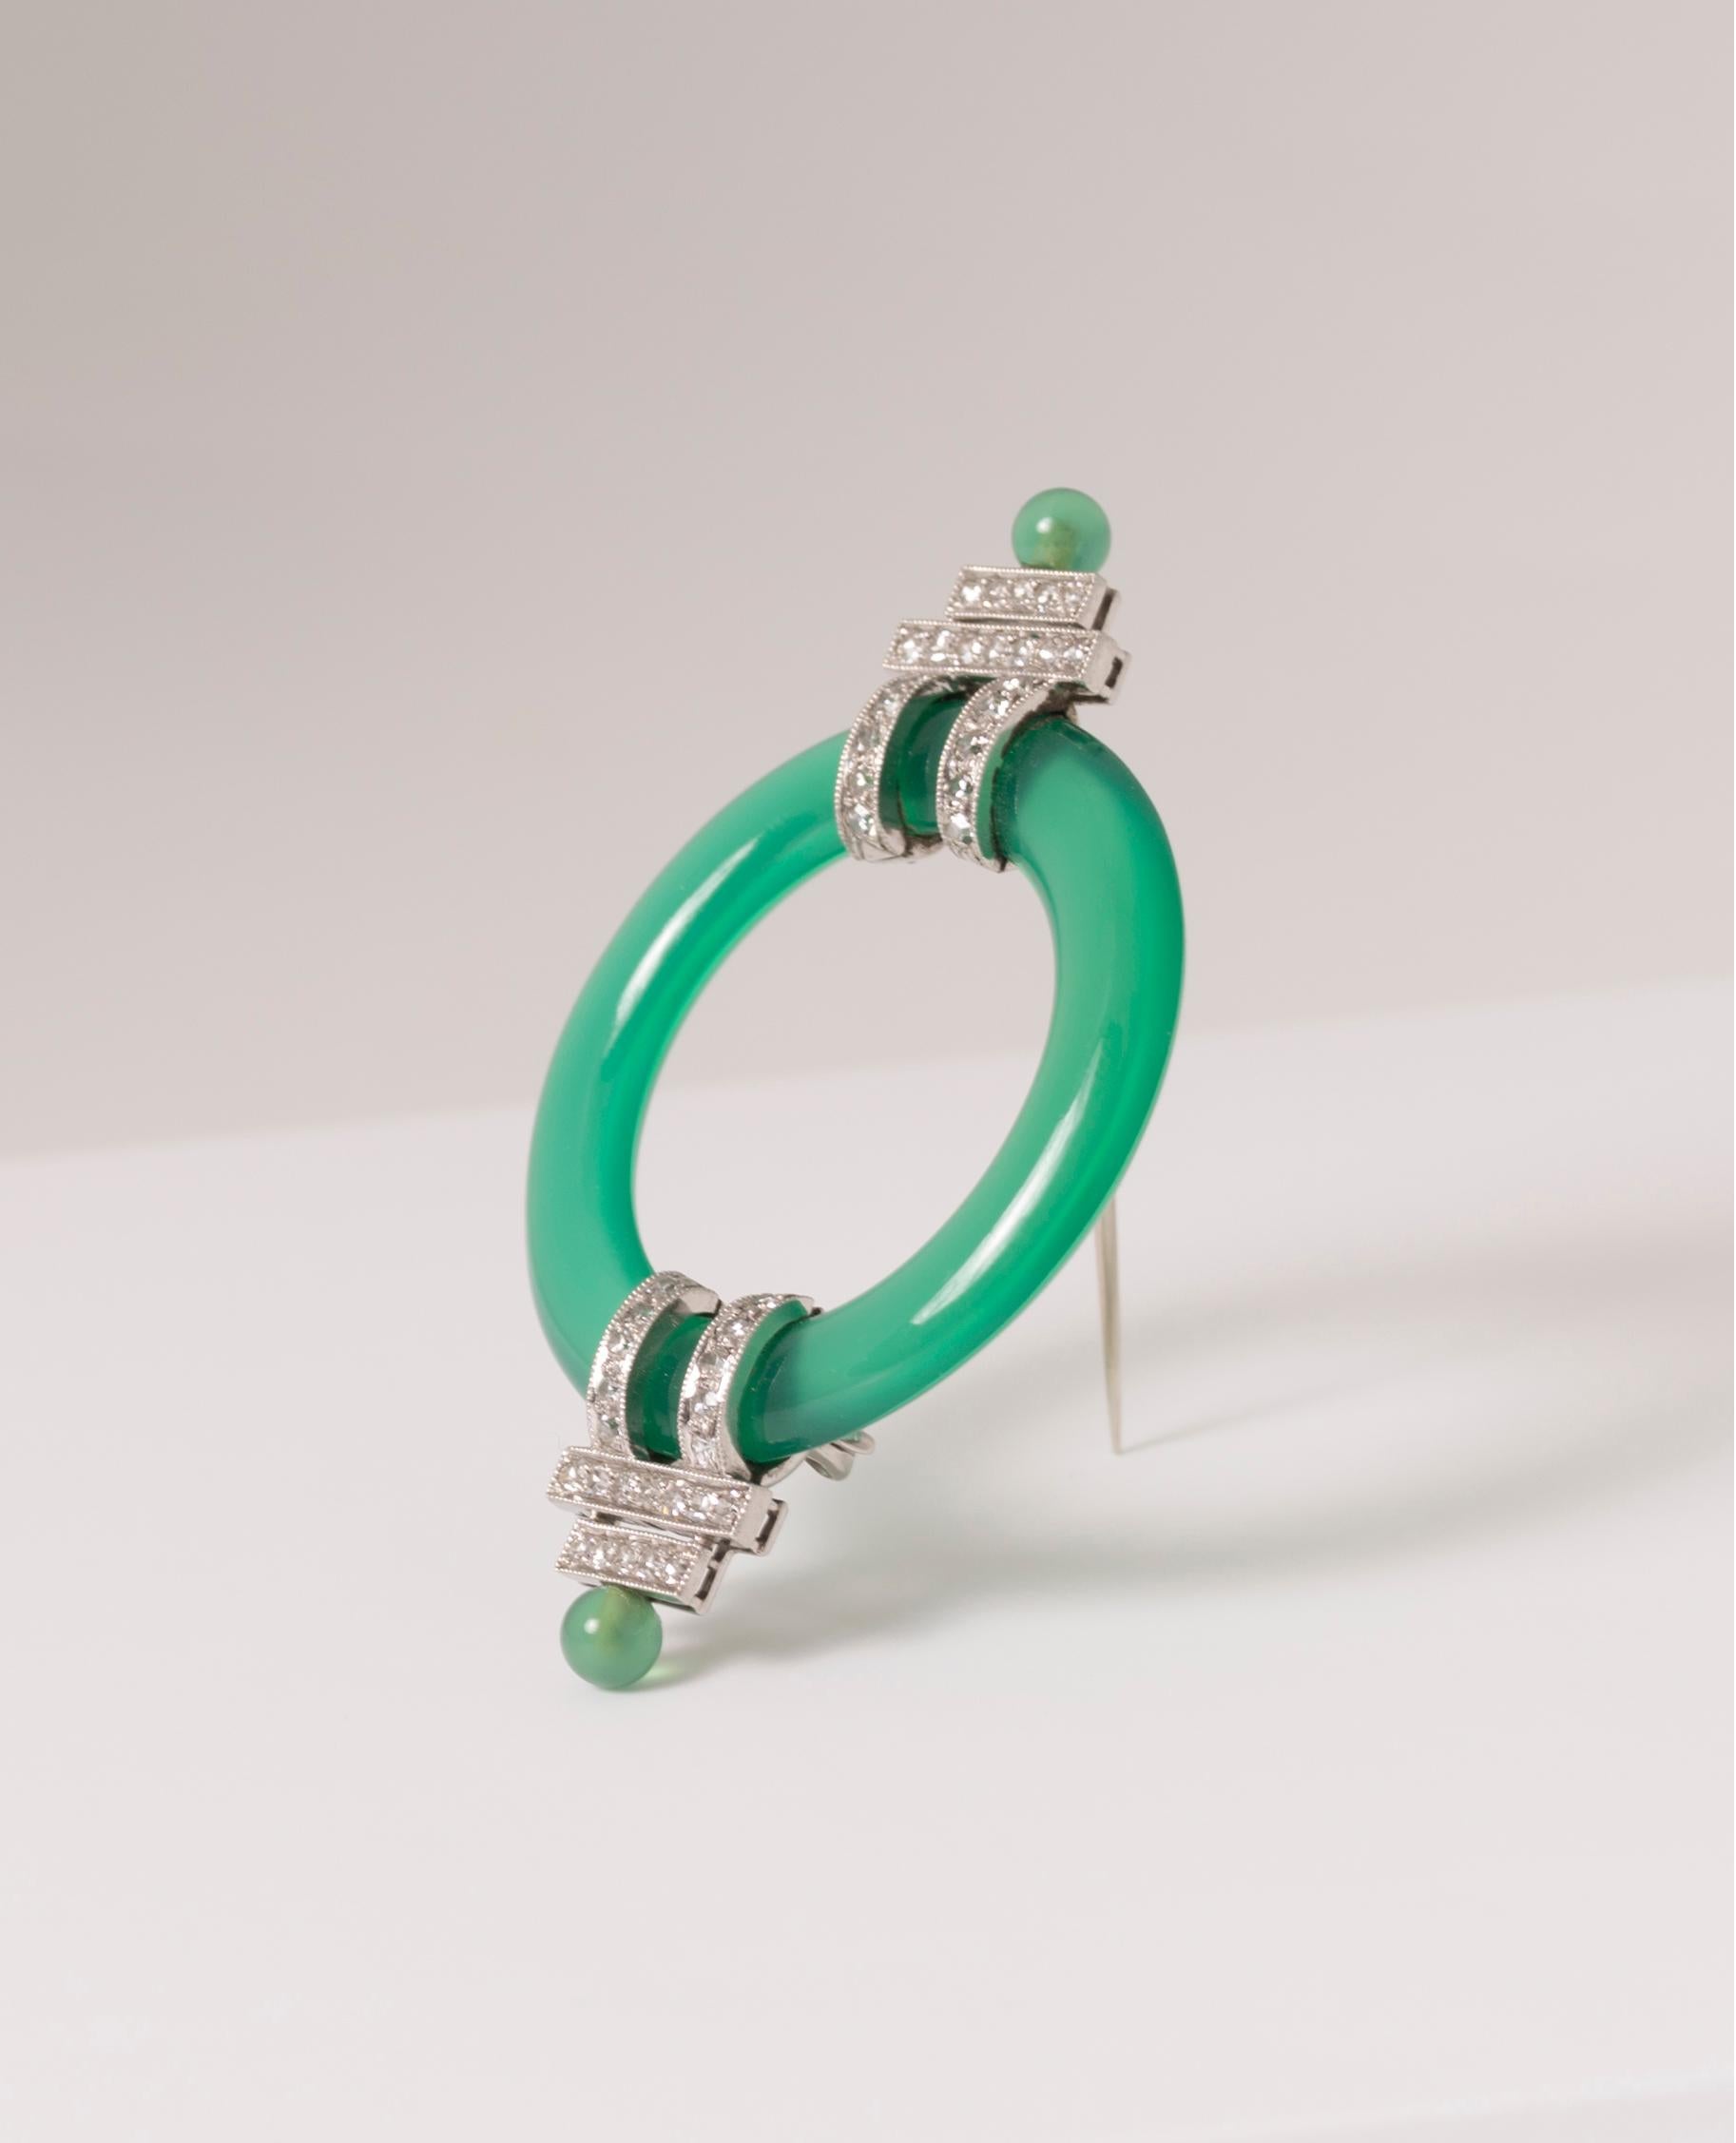 Black Starr & Frost
Ring Brooch, Circa 1925.
The carved chrysoprase ring with single-cut diamond (approx. 0.45 Carats) millegrained platinum straps and terminals
Signed B.S & F
 
The geometric shape associated with the strong green color of the ring